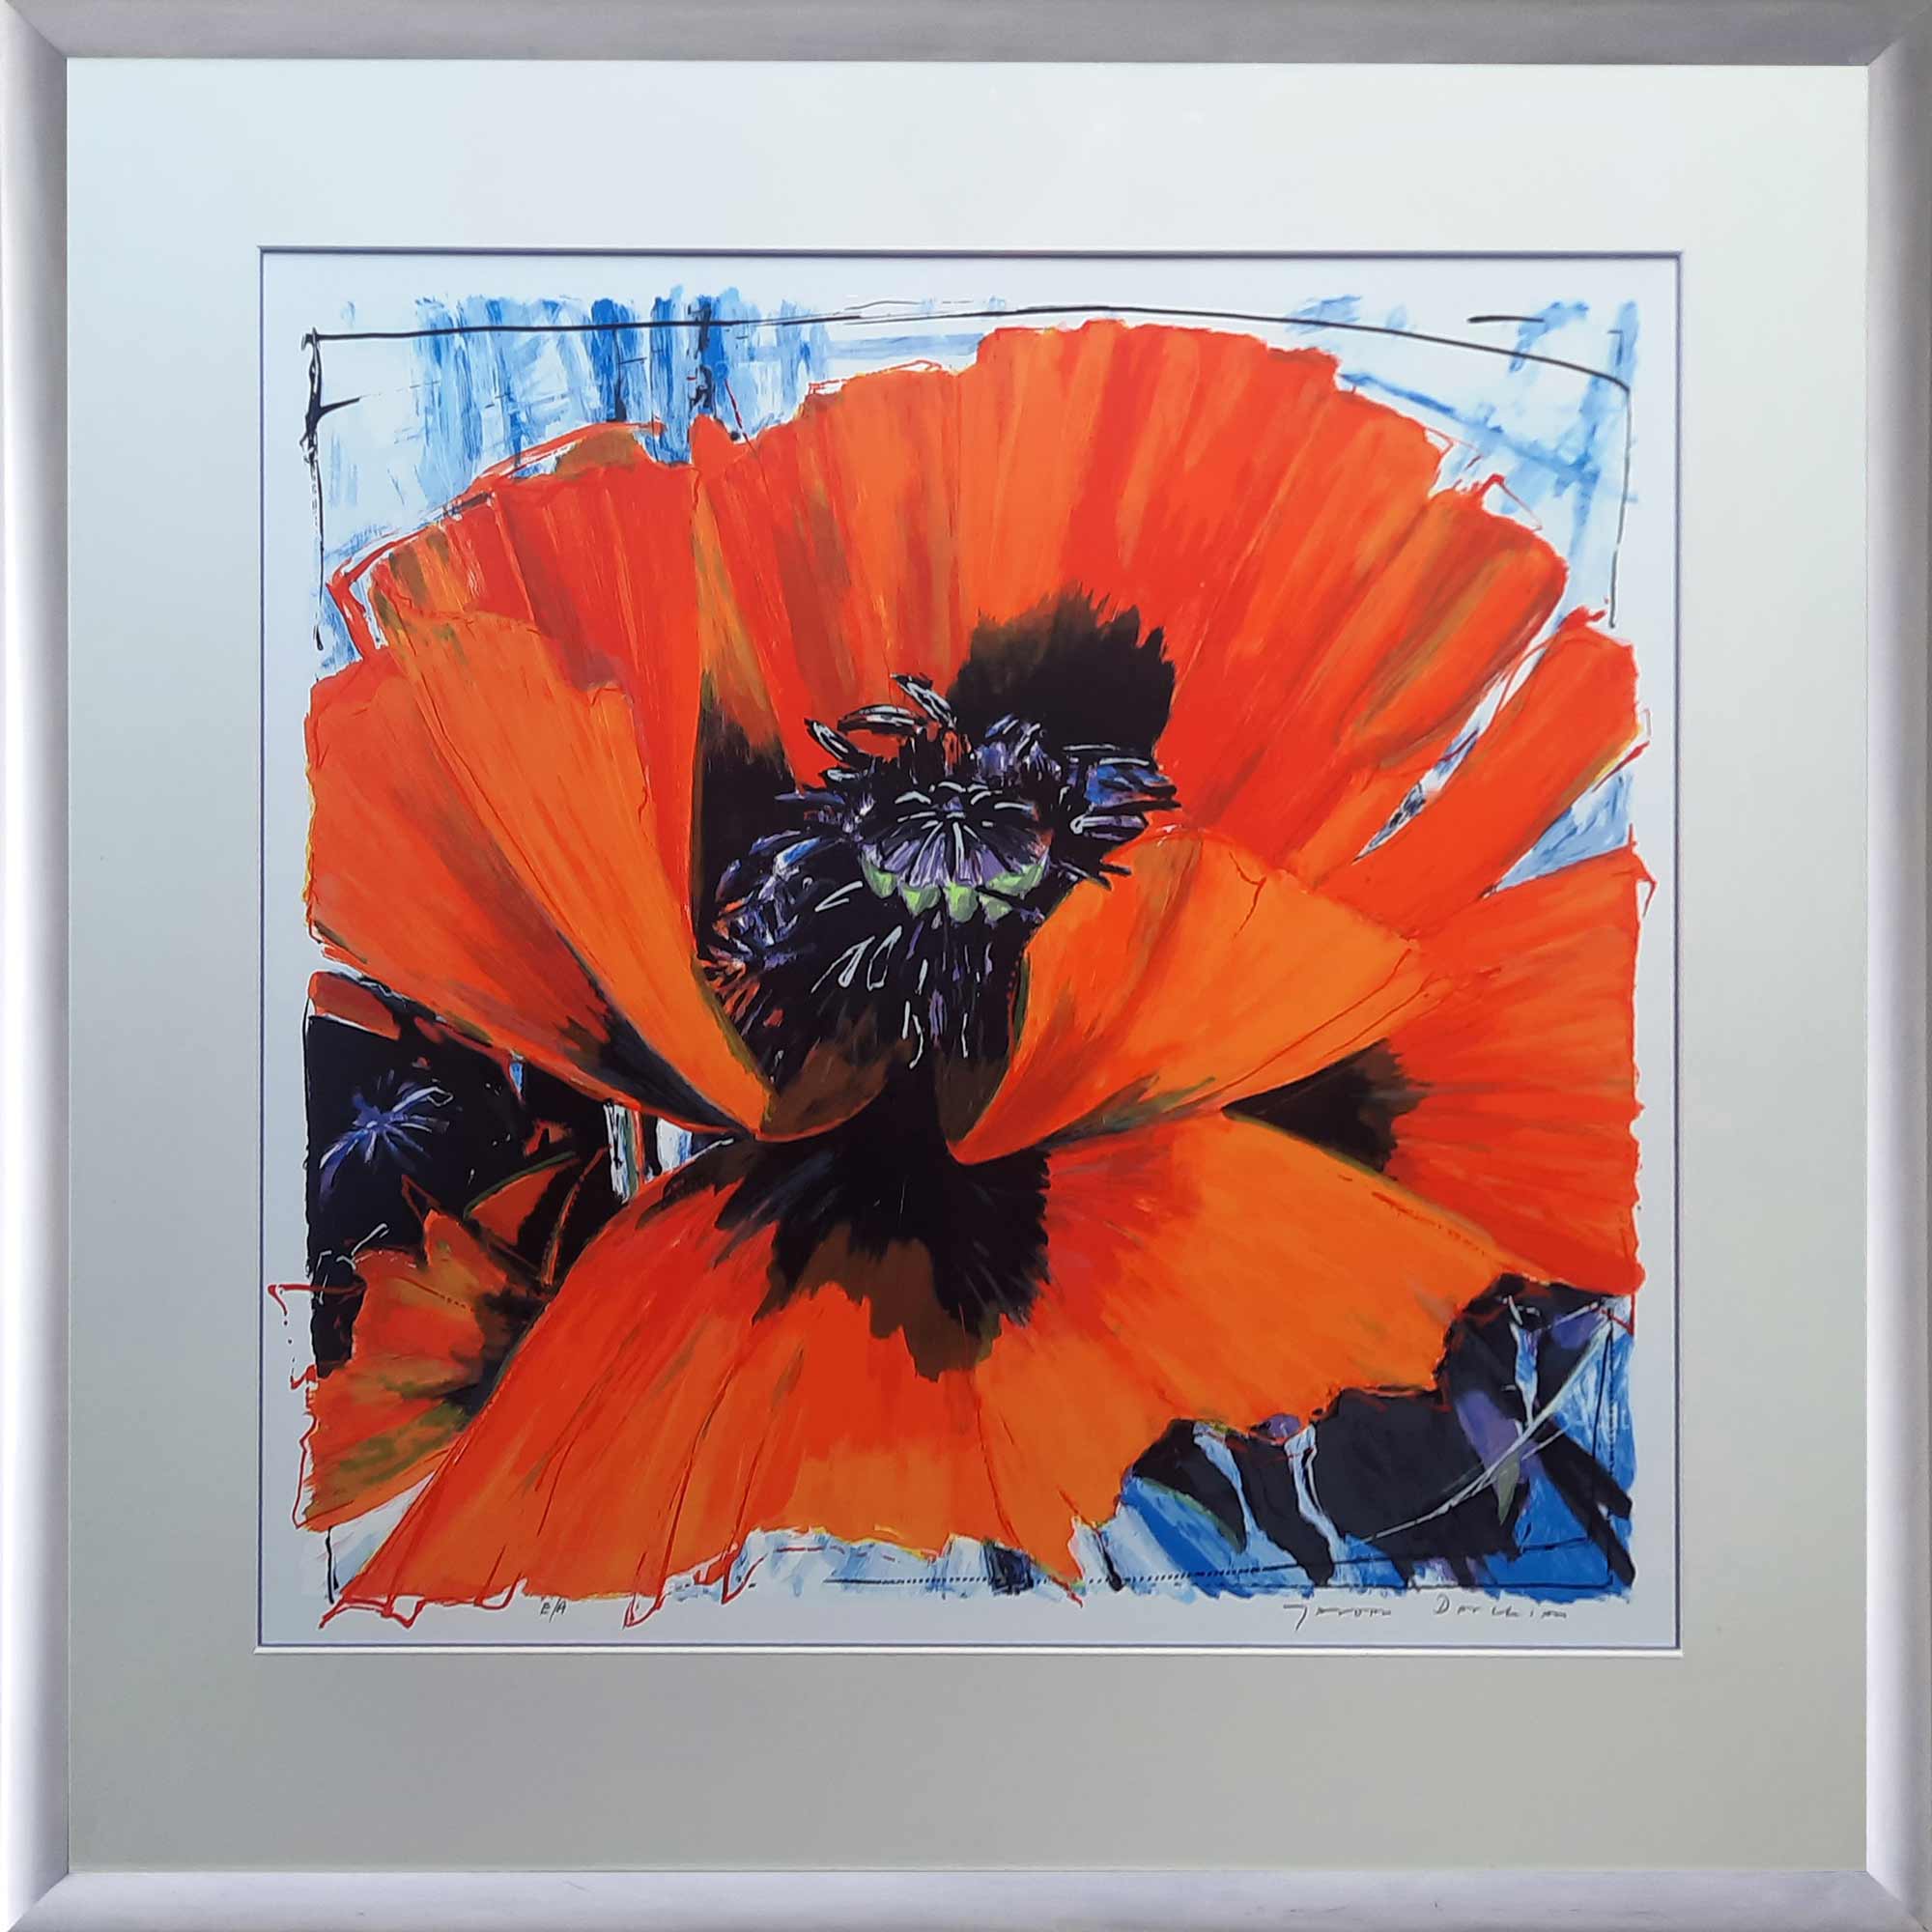 Featured image for “Papaver e/a”